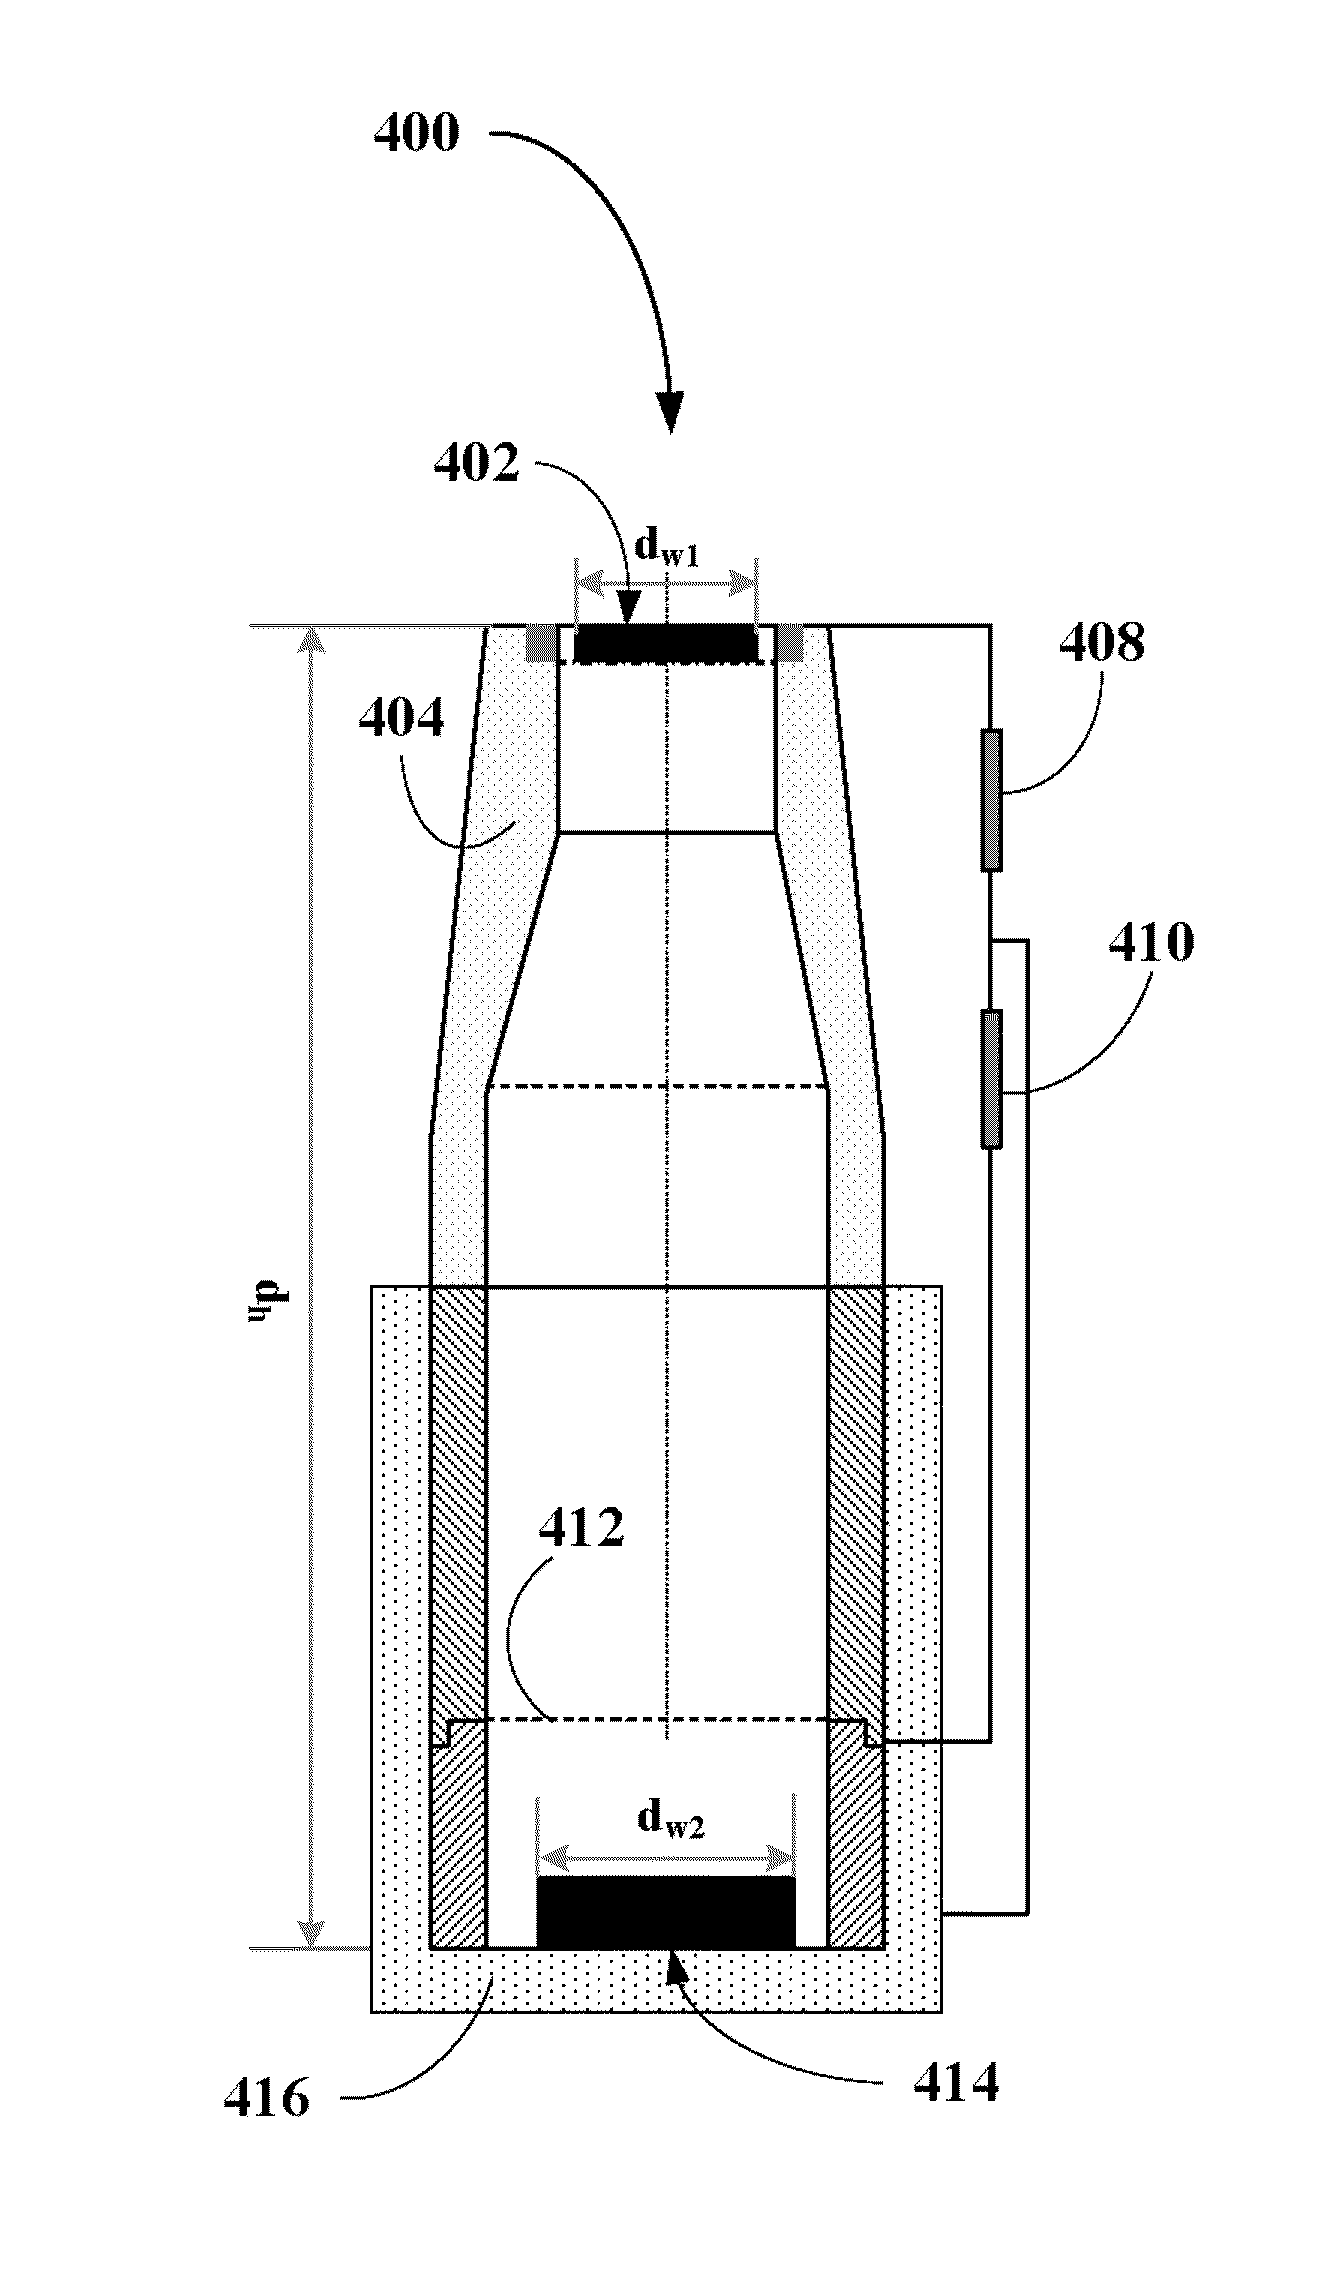 Portable/mobile fissible material detector and methods for making and using same